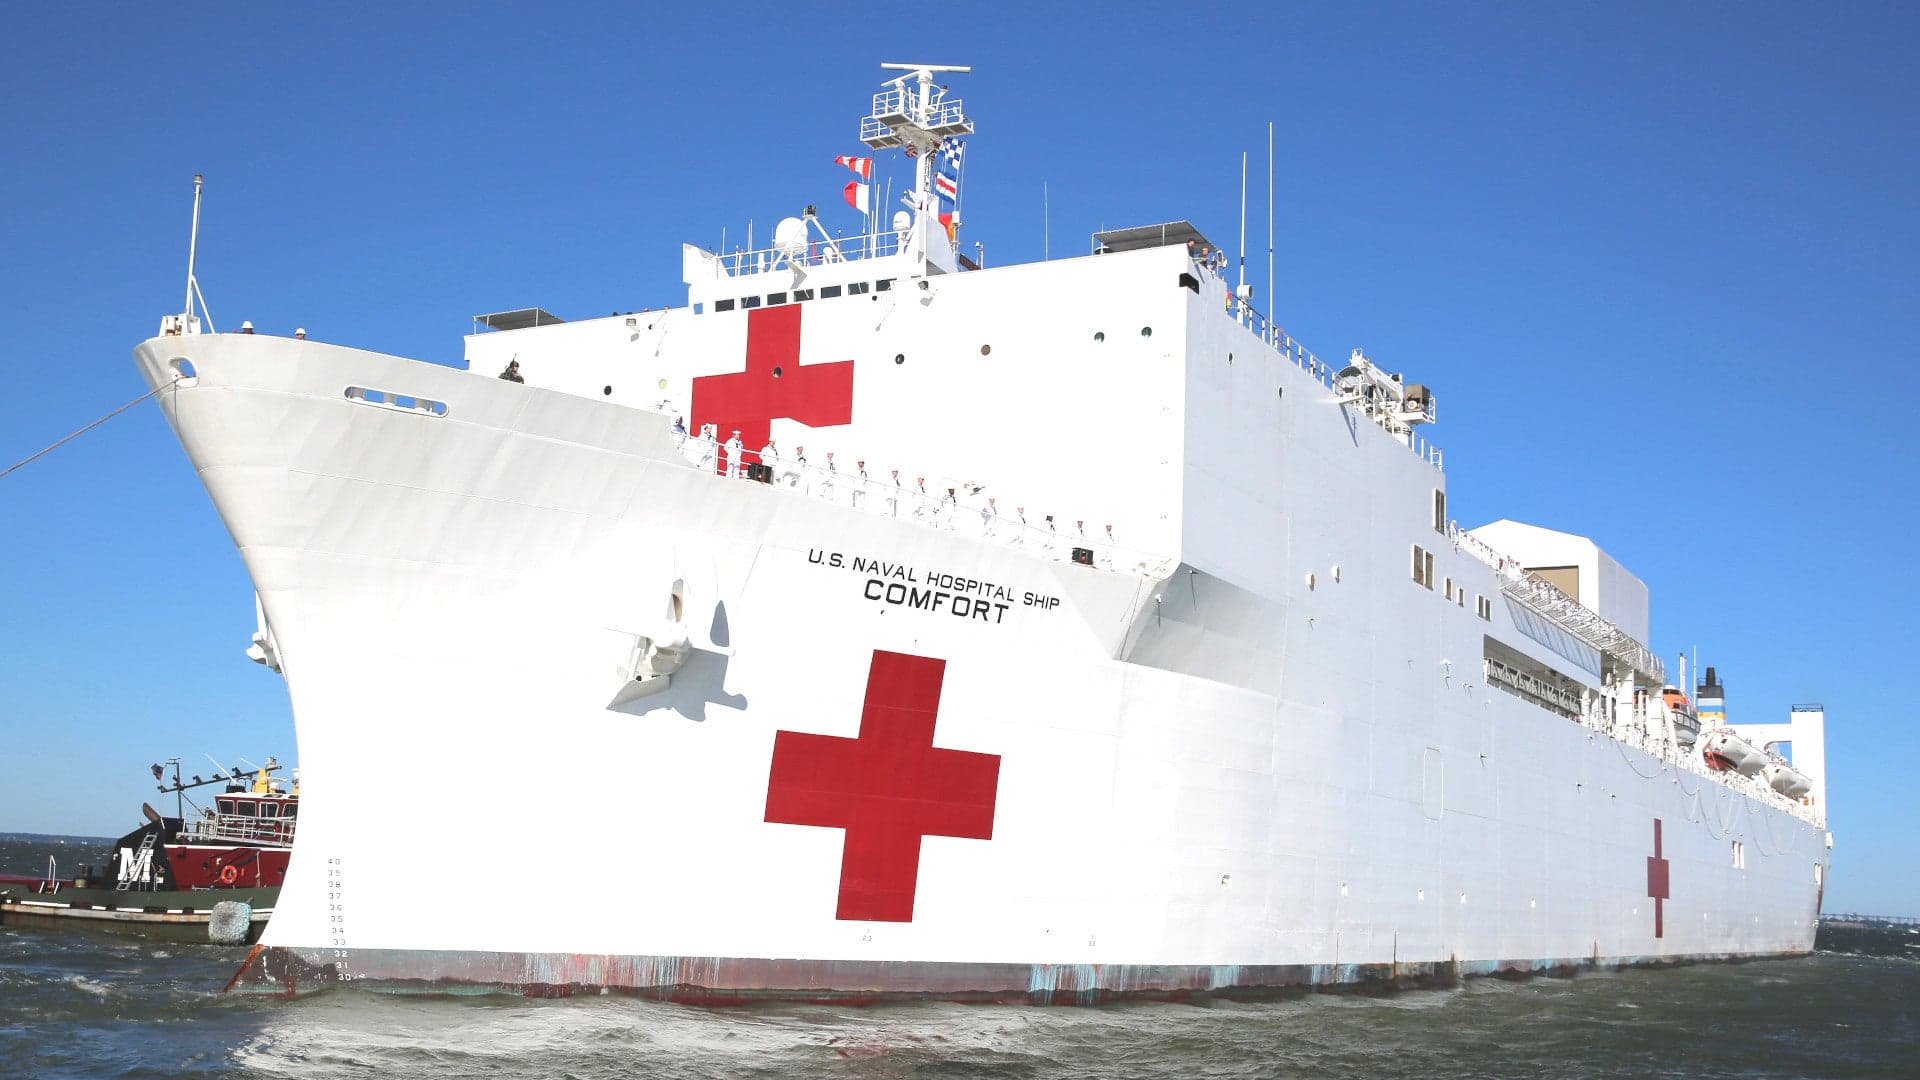 Navy Hospital Ship Still Weeks Away From Arriving In New York City To Help Battle COVID-19